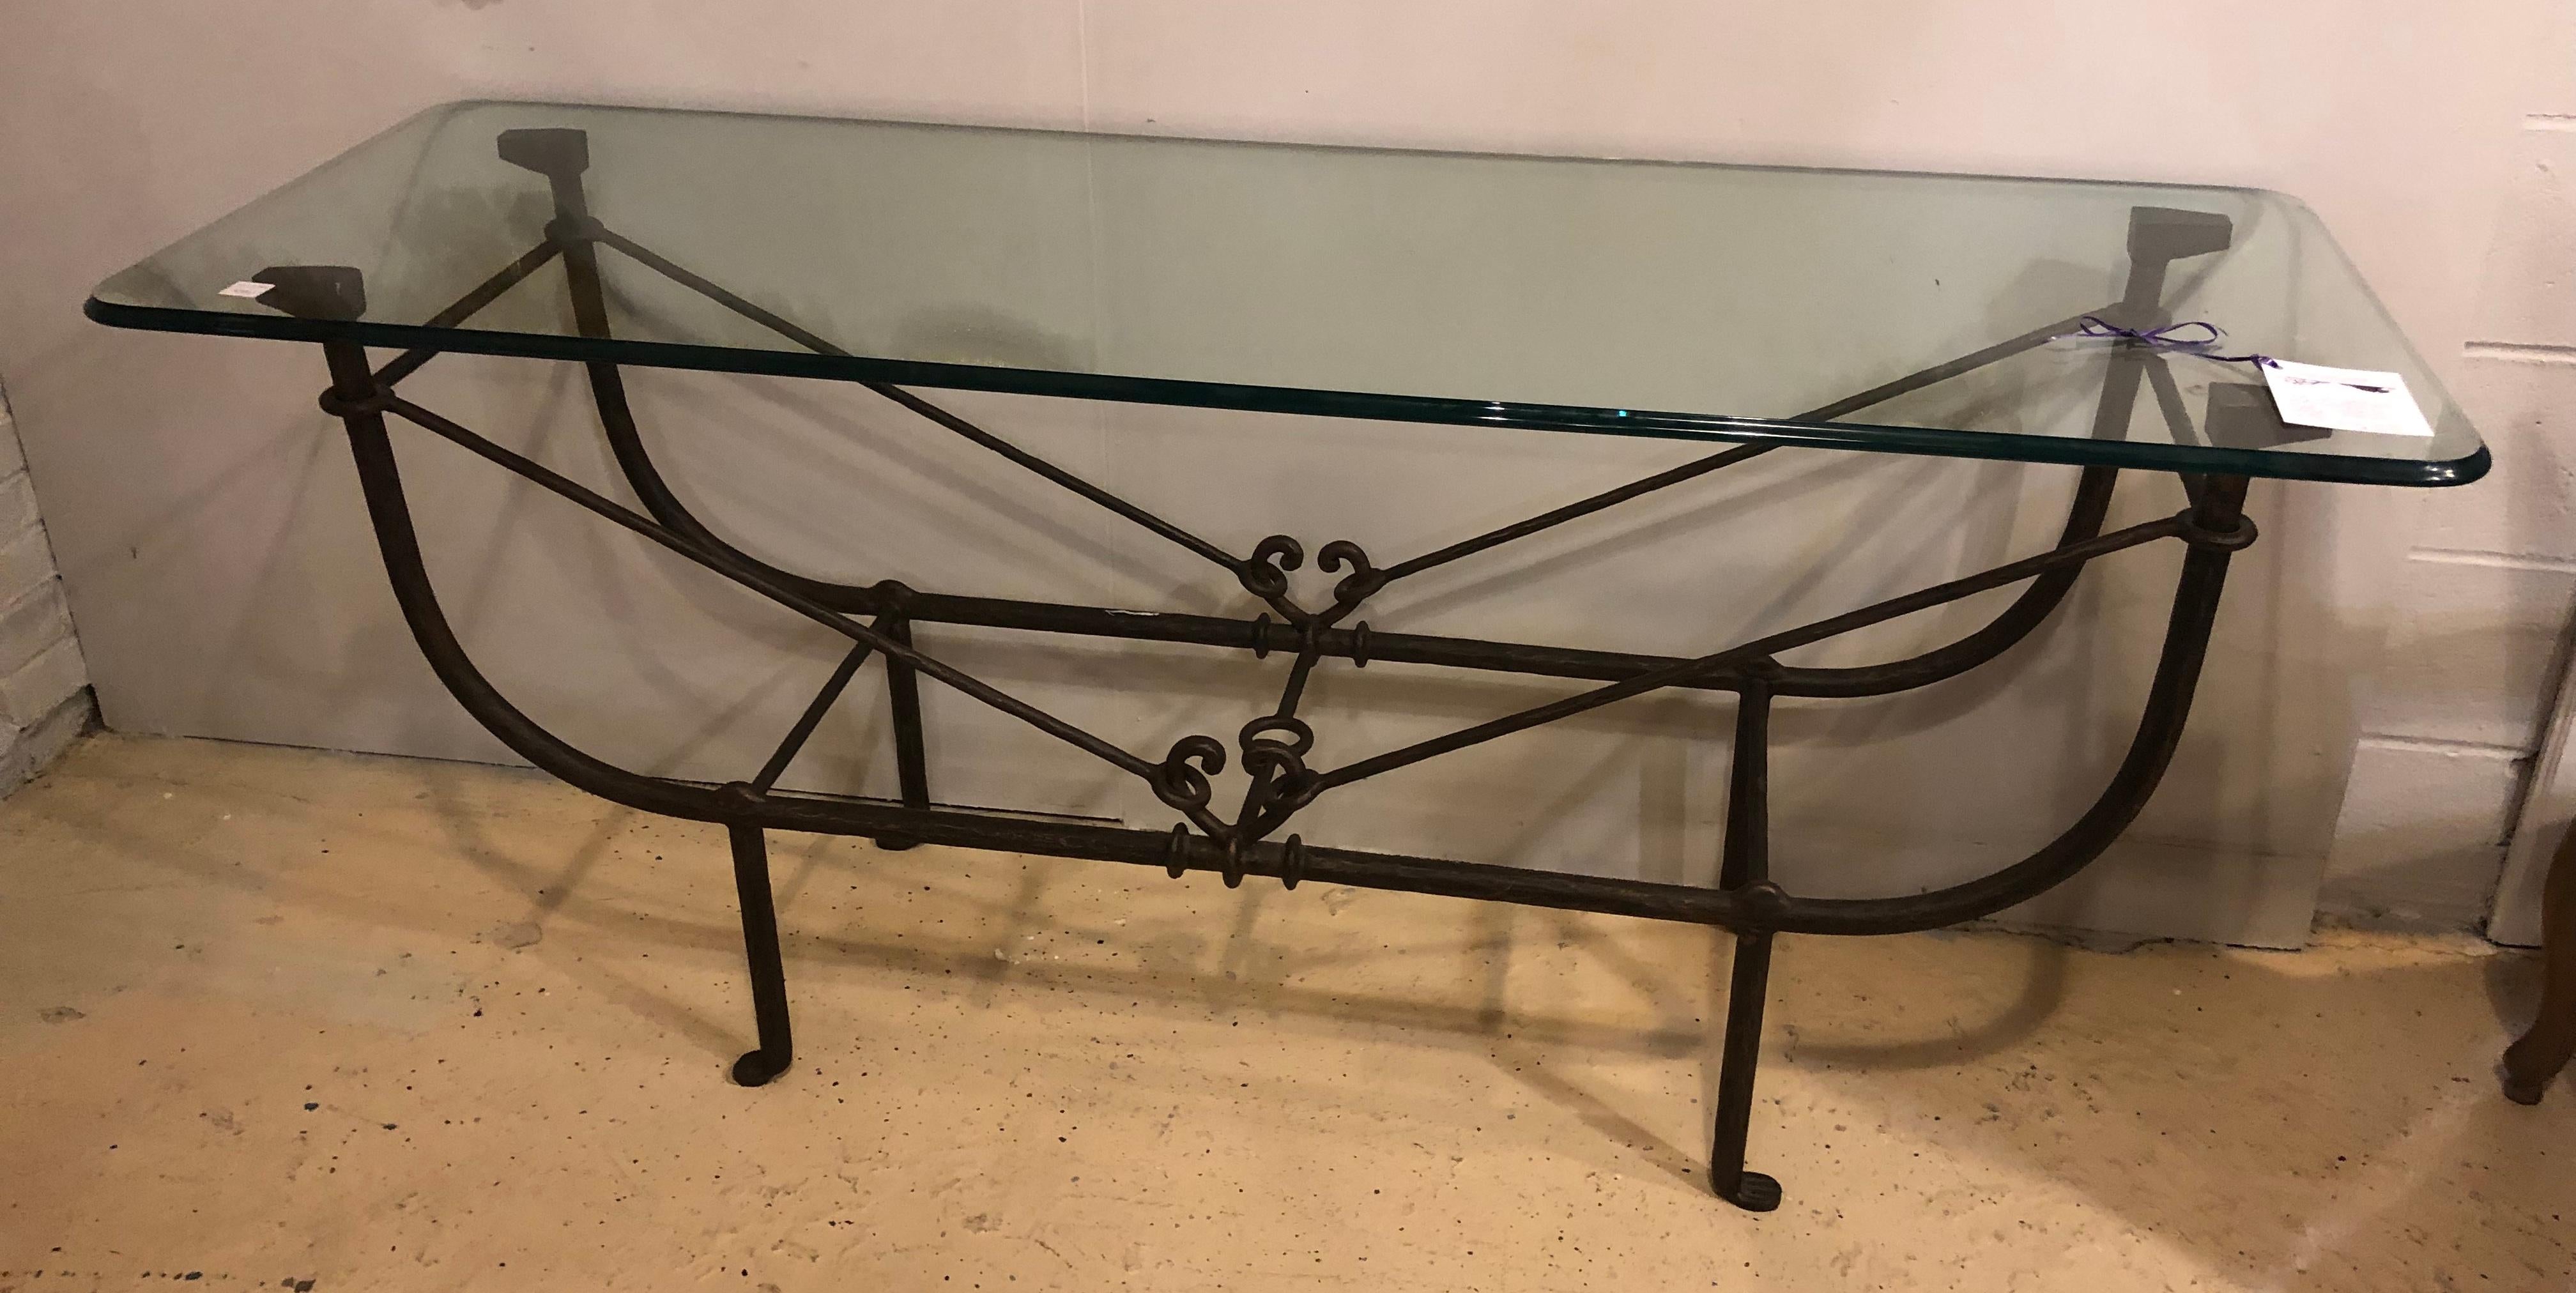 Large and impressive Metal Diego Giacometti style console table. The heavy strong and sturdy console or sofa table has a Giacometti form base supporting a finely beveled glass top.
Diego Giacometti (15 November 1902 – 15 July 1985) was a Swiss